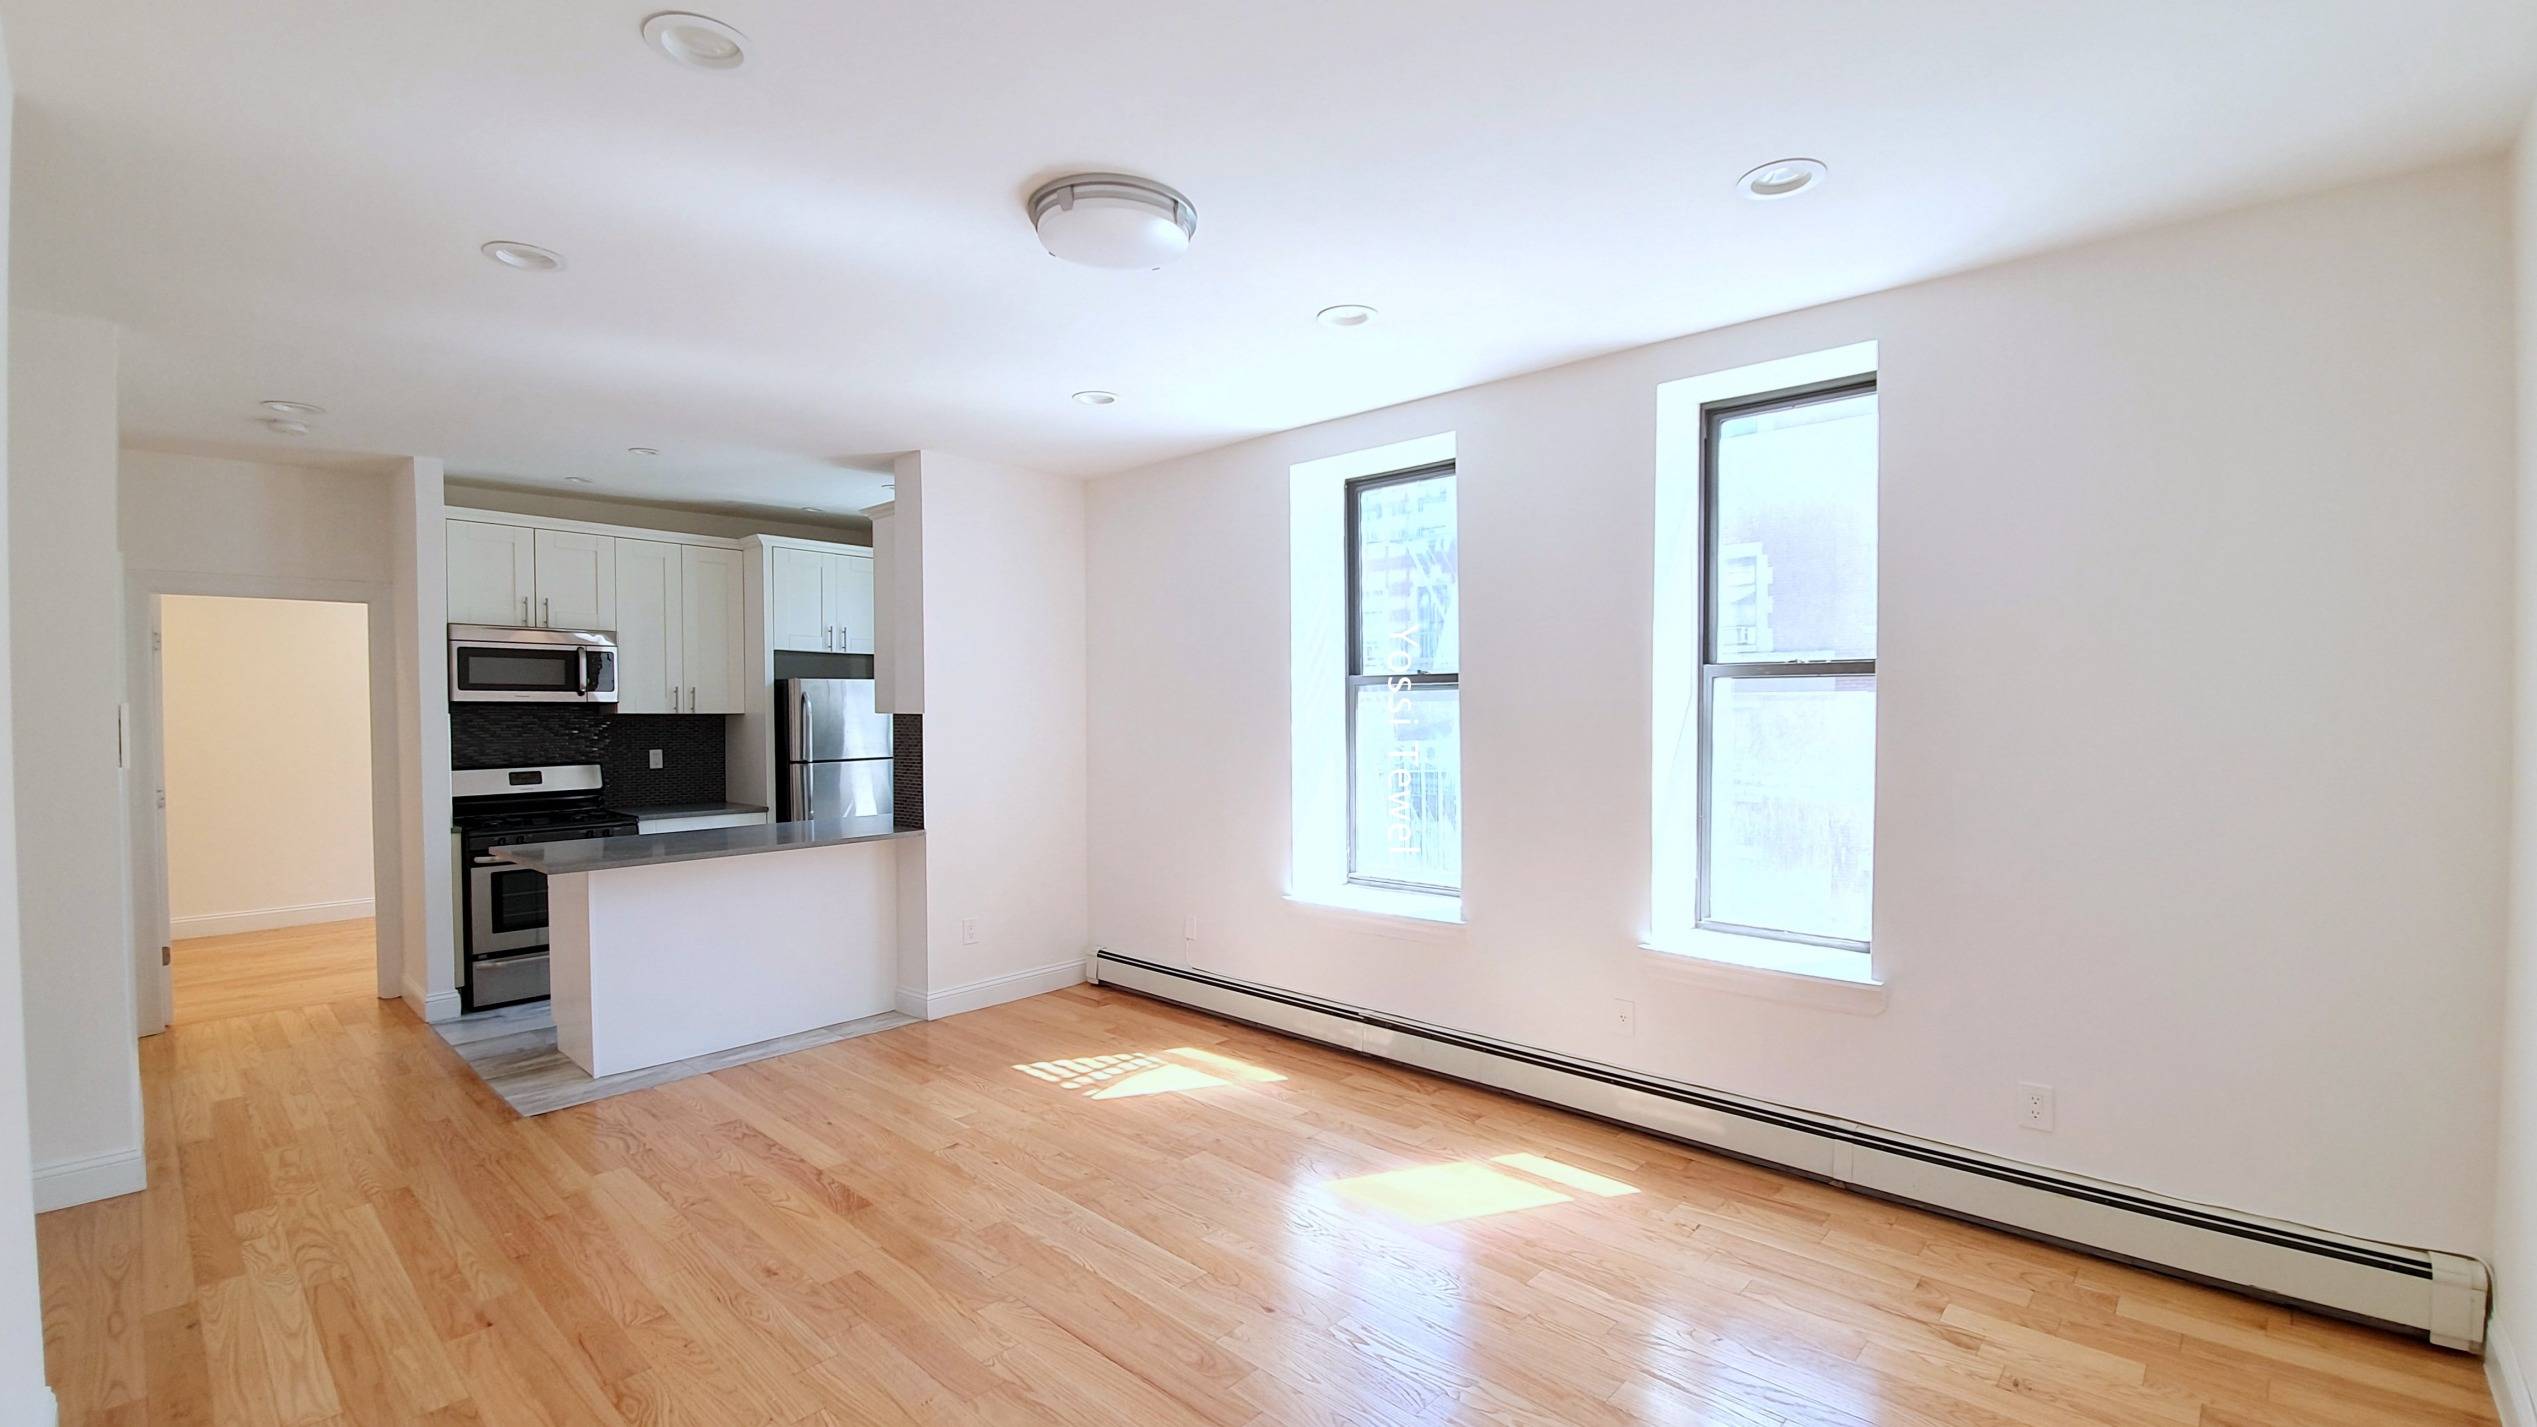 Enjoy this beautiful renovated 1 bedroom located in PRIME Morning side.